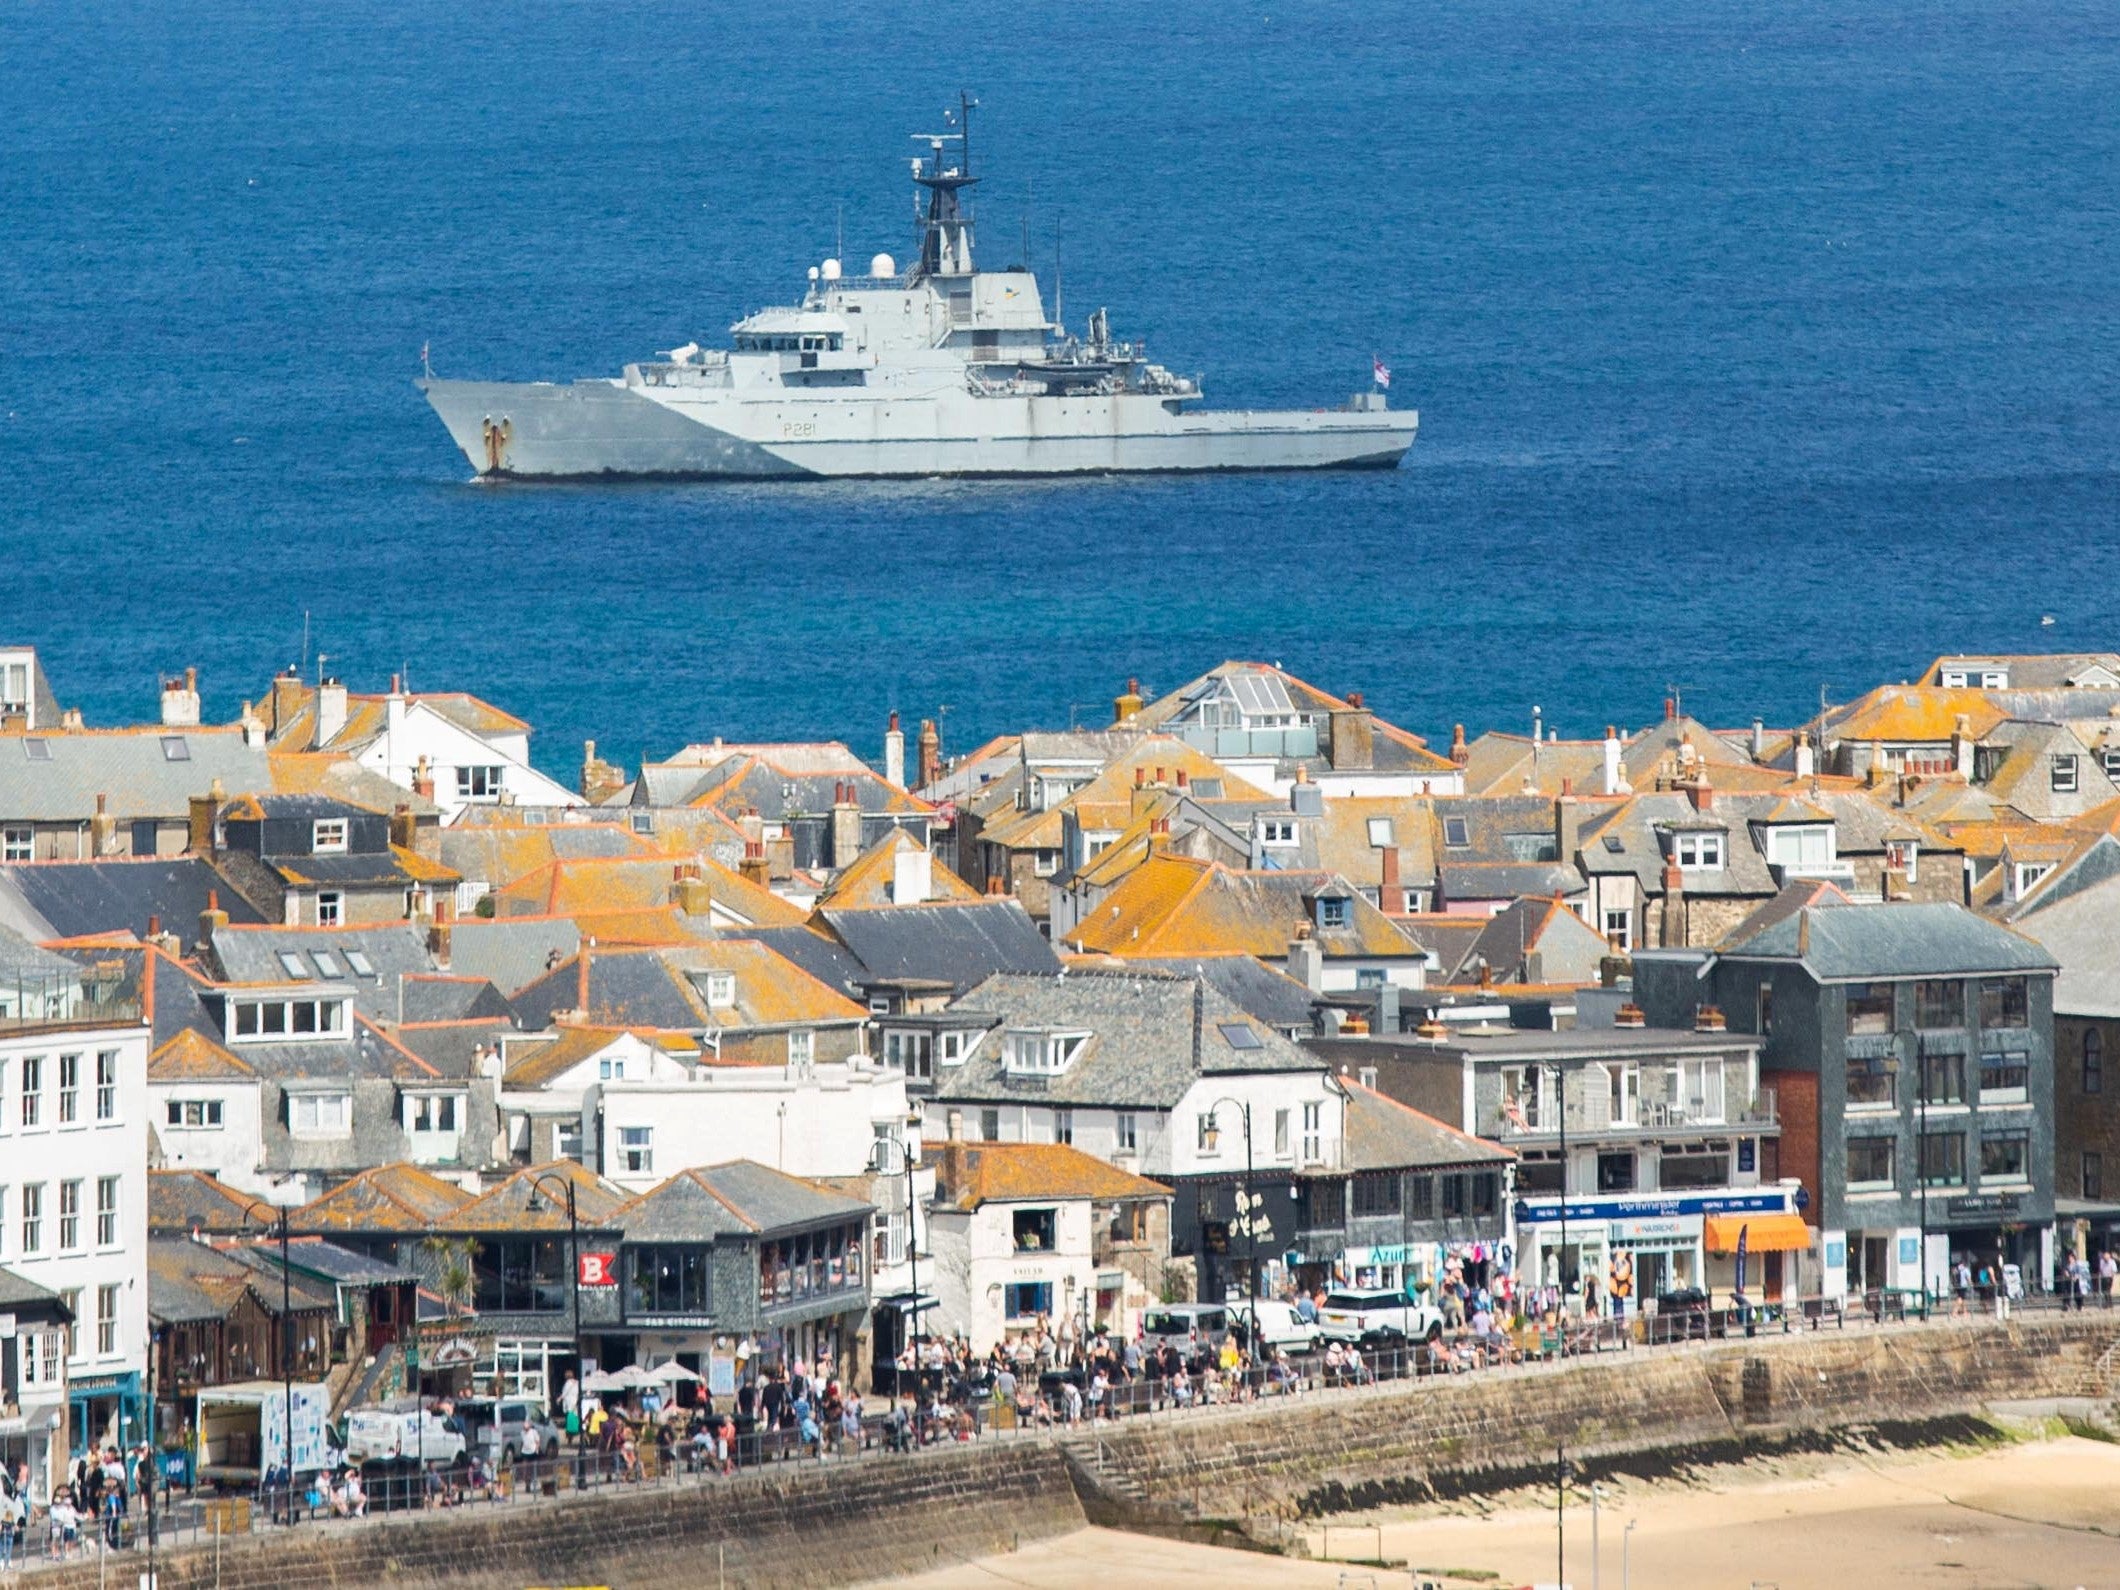 HMS Tyne is seen in just off the coast at the G7 summit site in St Ives, Cornwall, June 8 2021. Leaders from around the world are expected in the seaside town later this week.